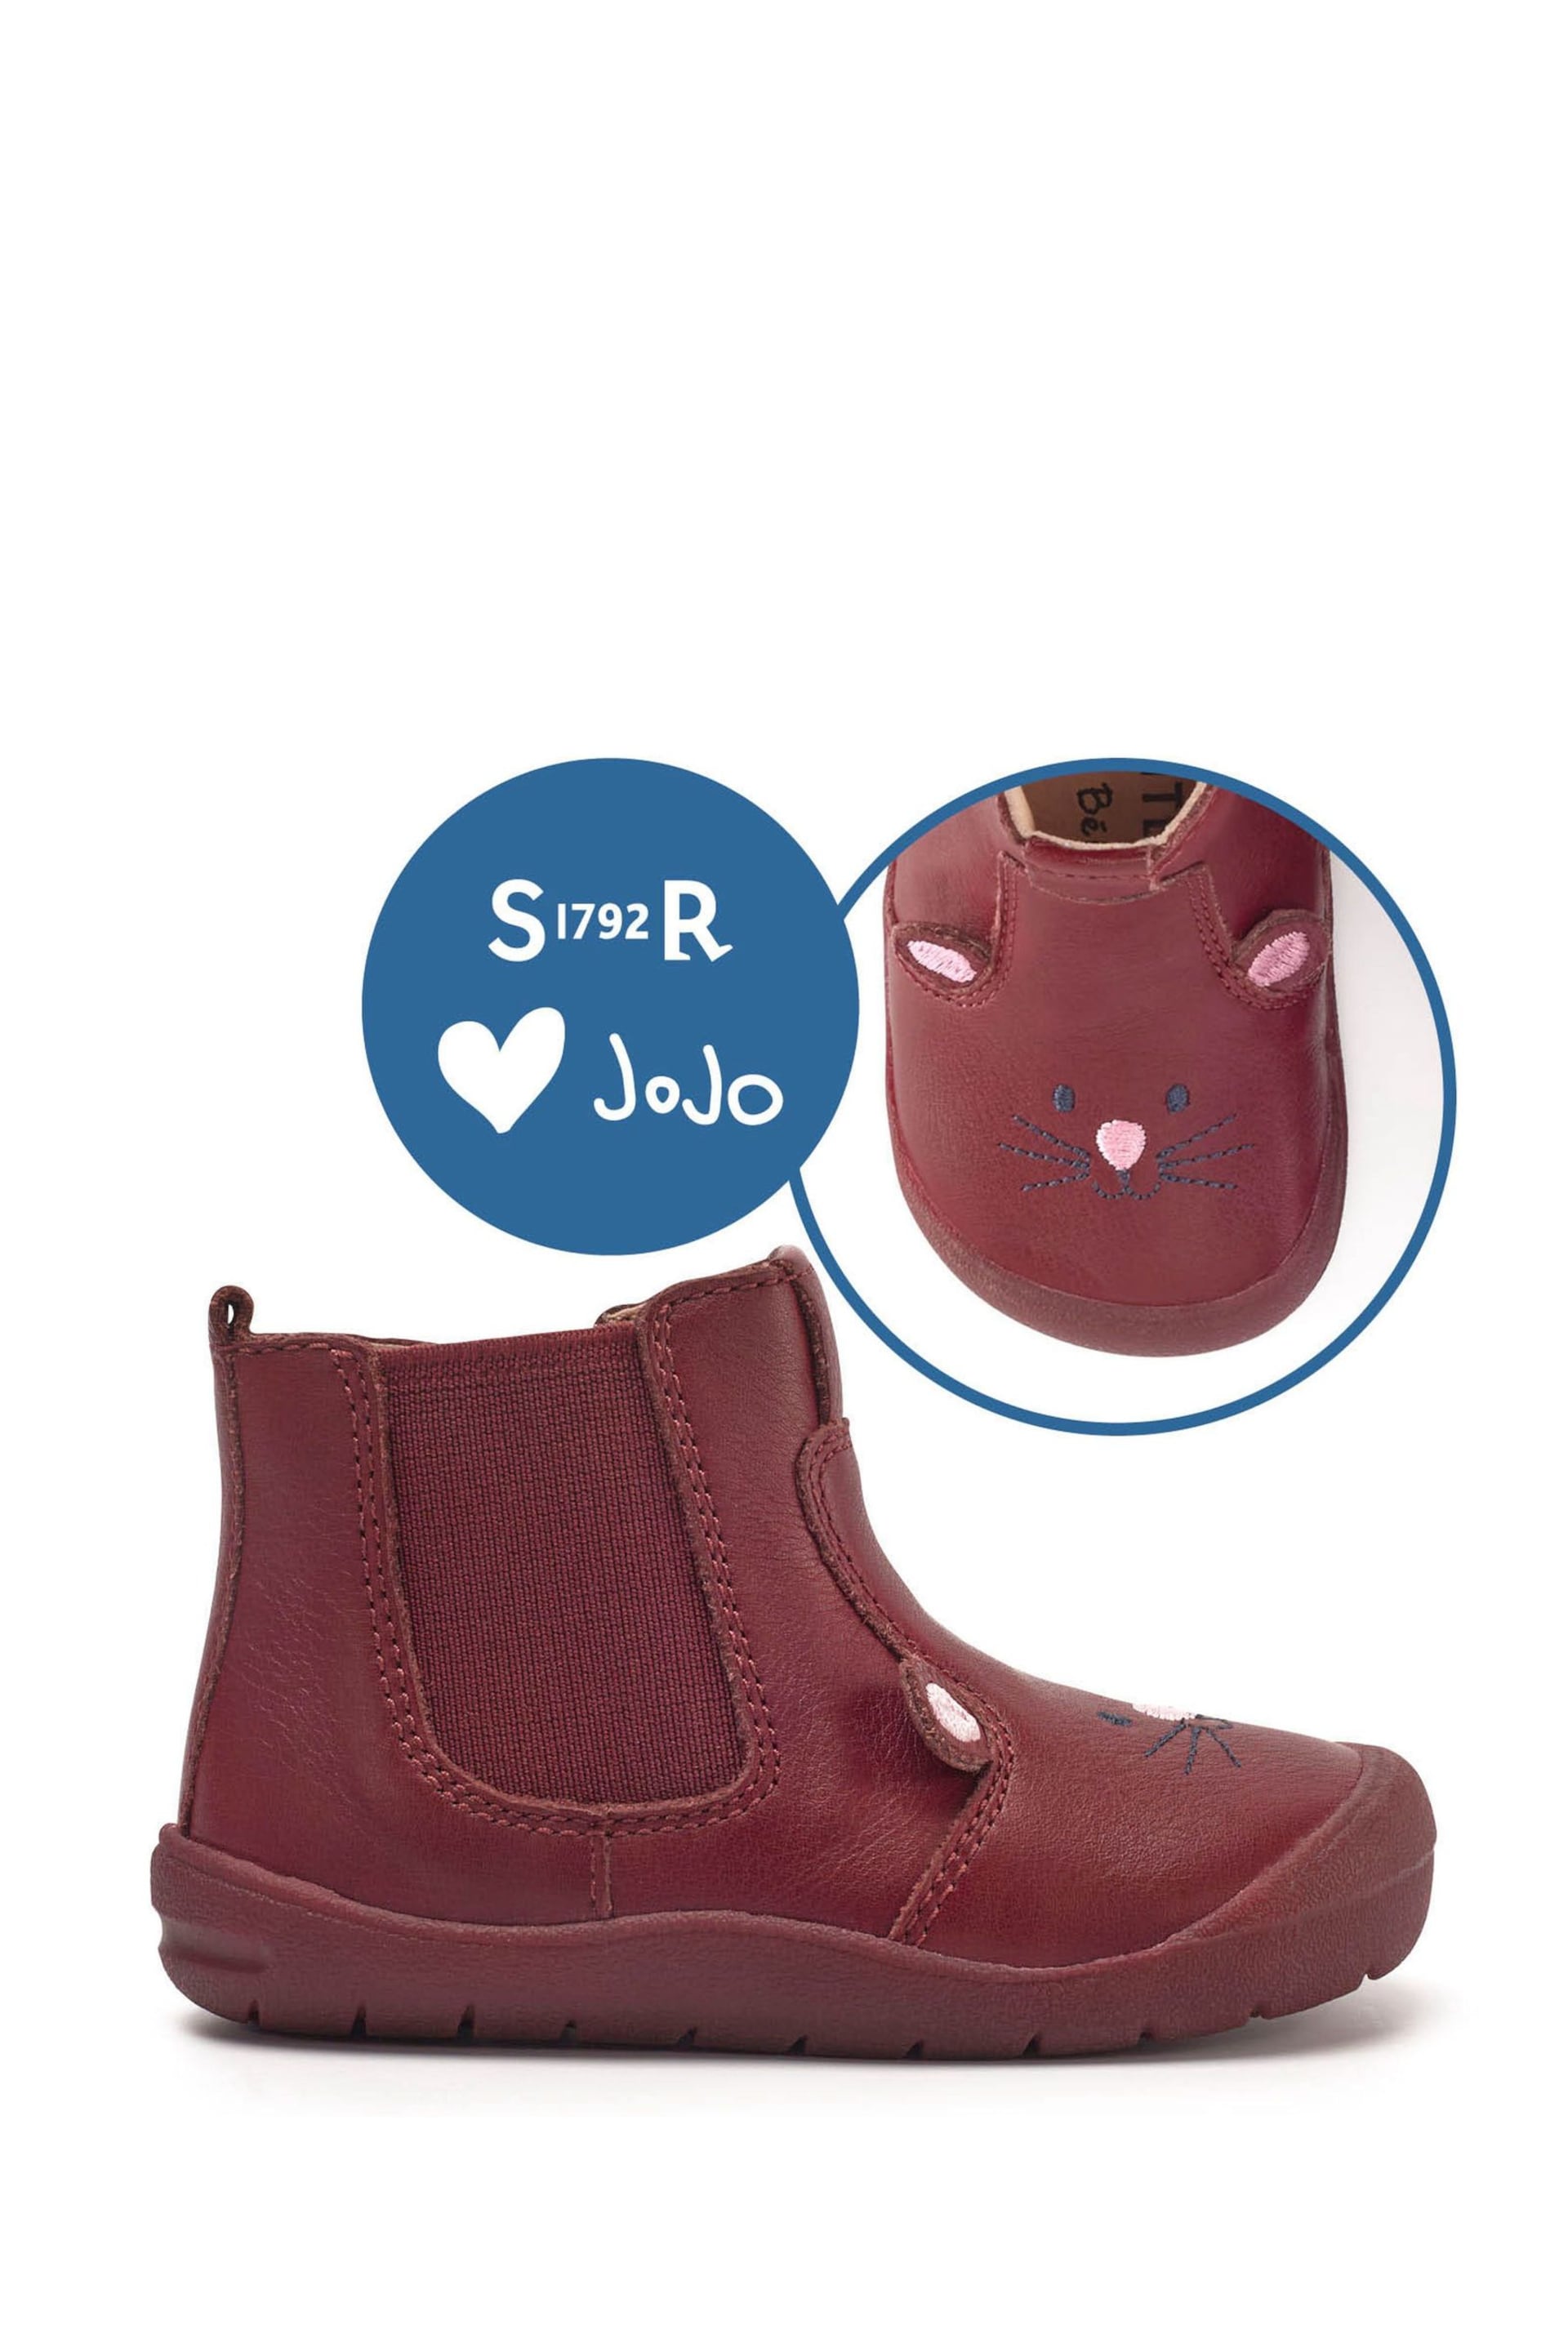 Start Rite x JoJo Friend Red Leather Zip Up Boots - Image 2 of 6